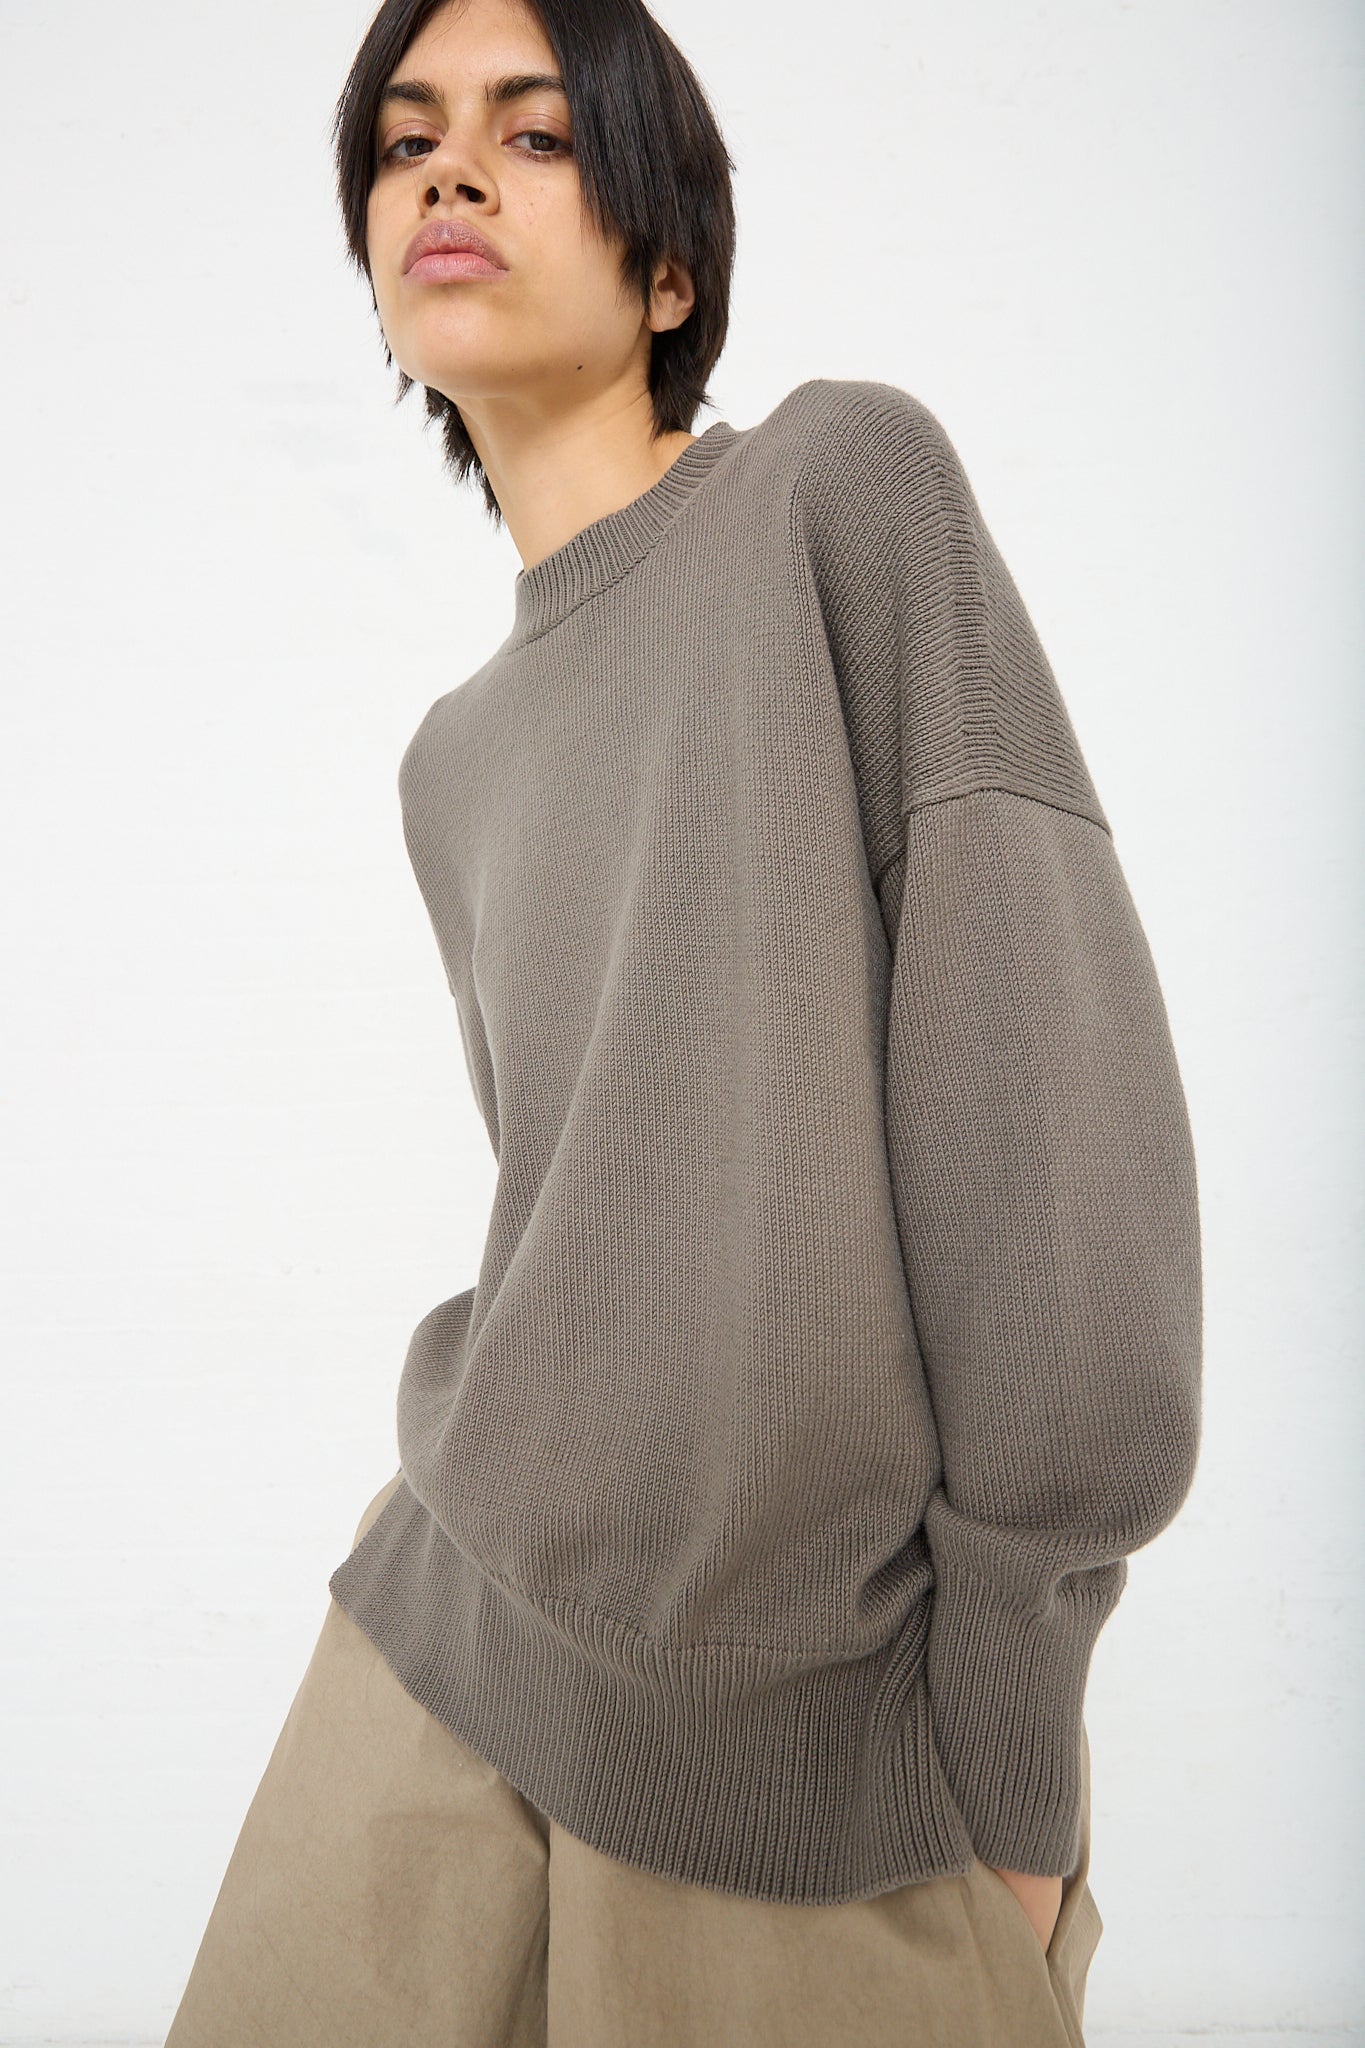 The model is wearing a Simple Crewneck in Rock (Olive Brown) by Lauren Manoogian and khaki pants. Front view.